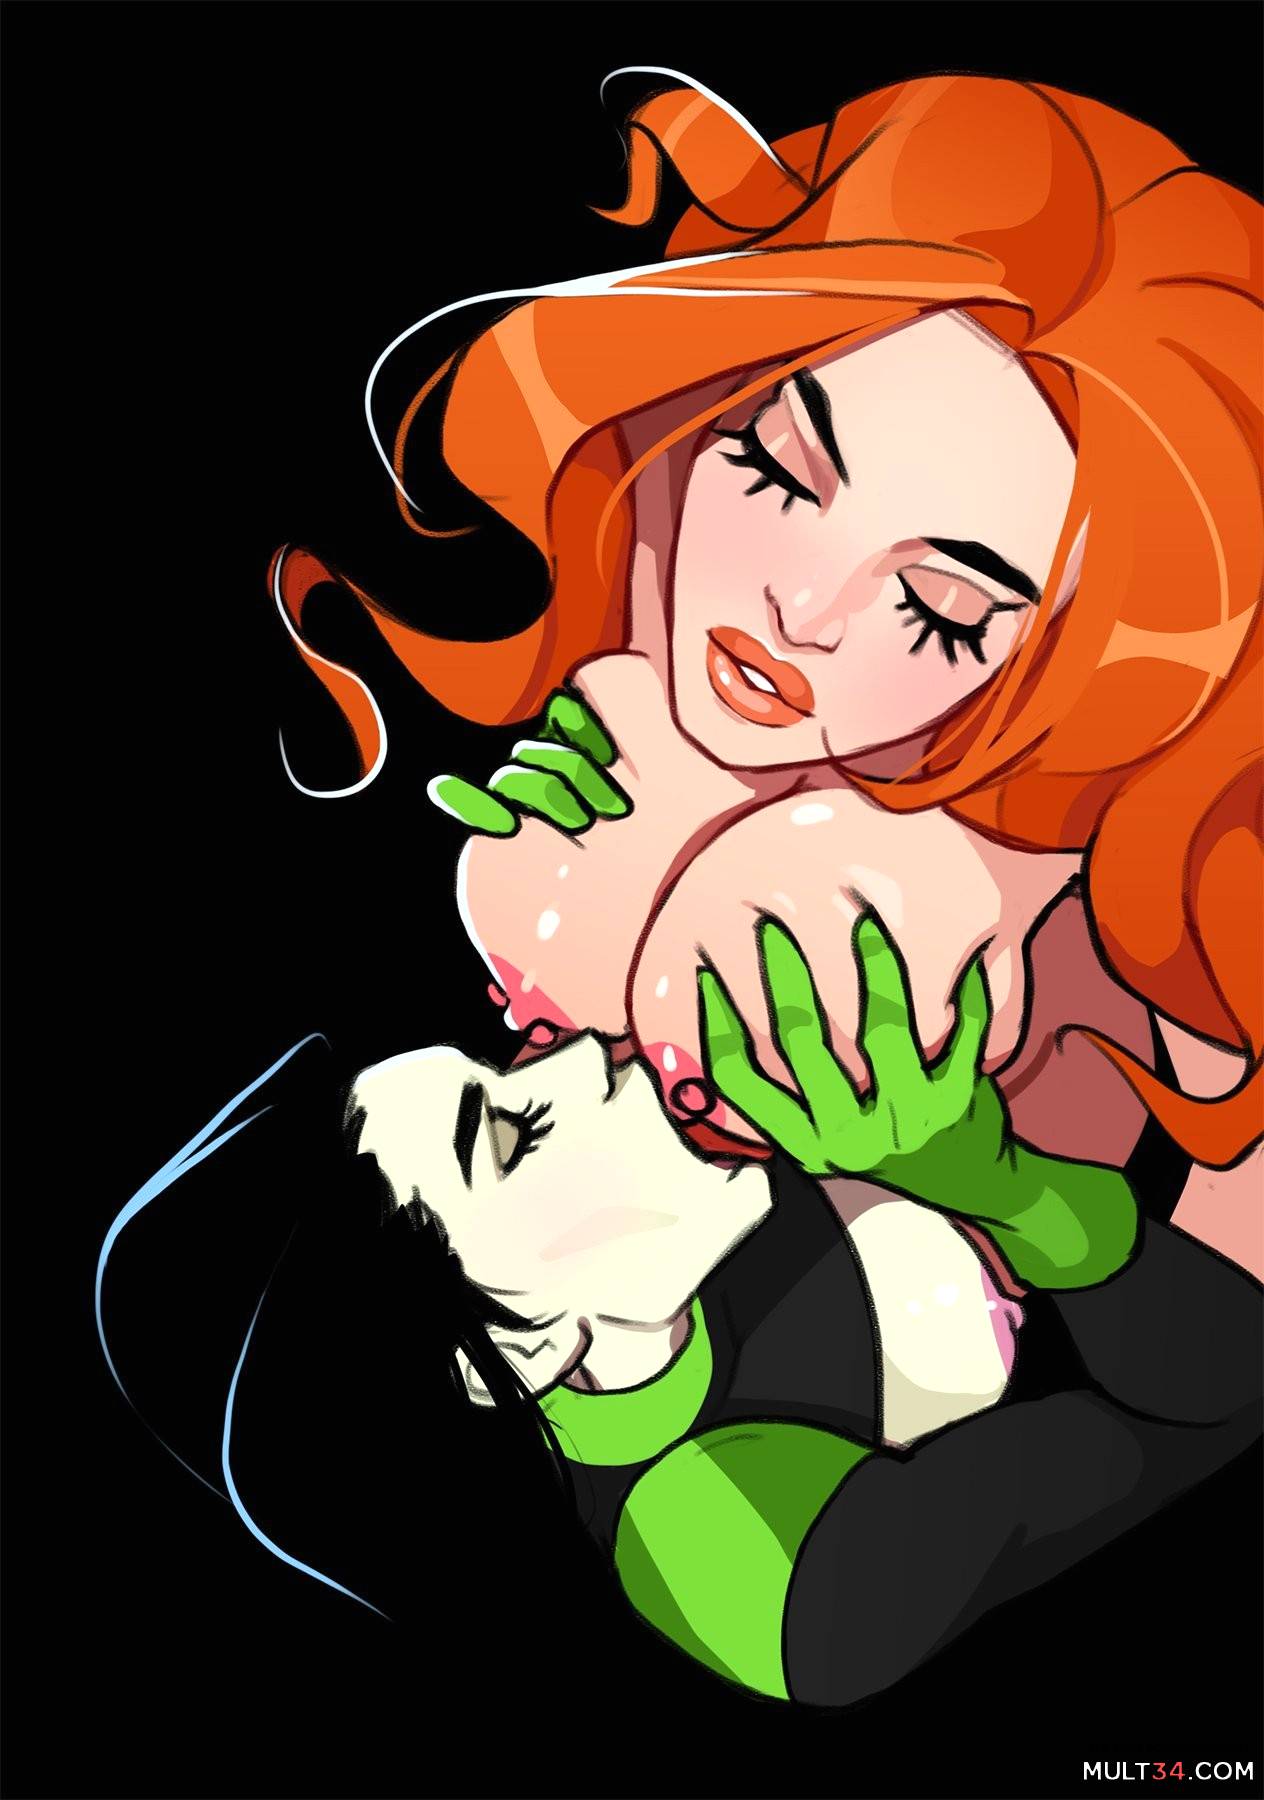 Kim and Shego: Date on the roof page 8